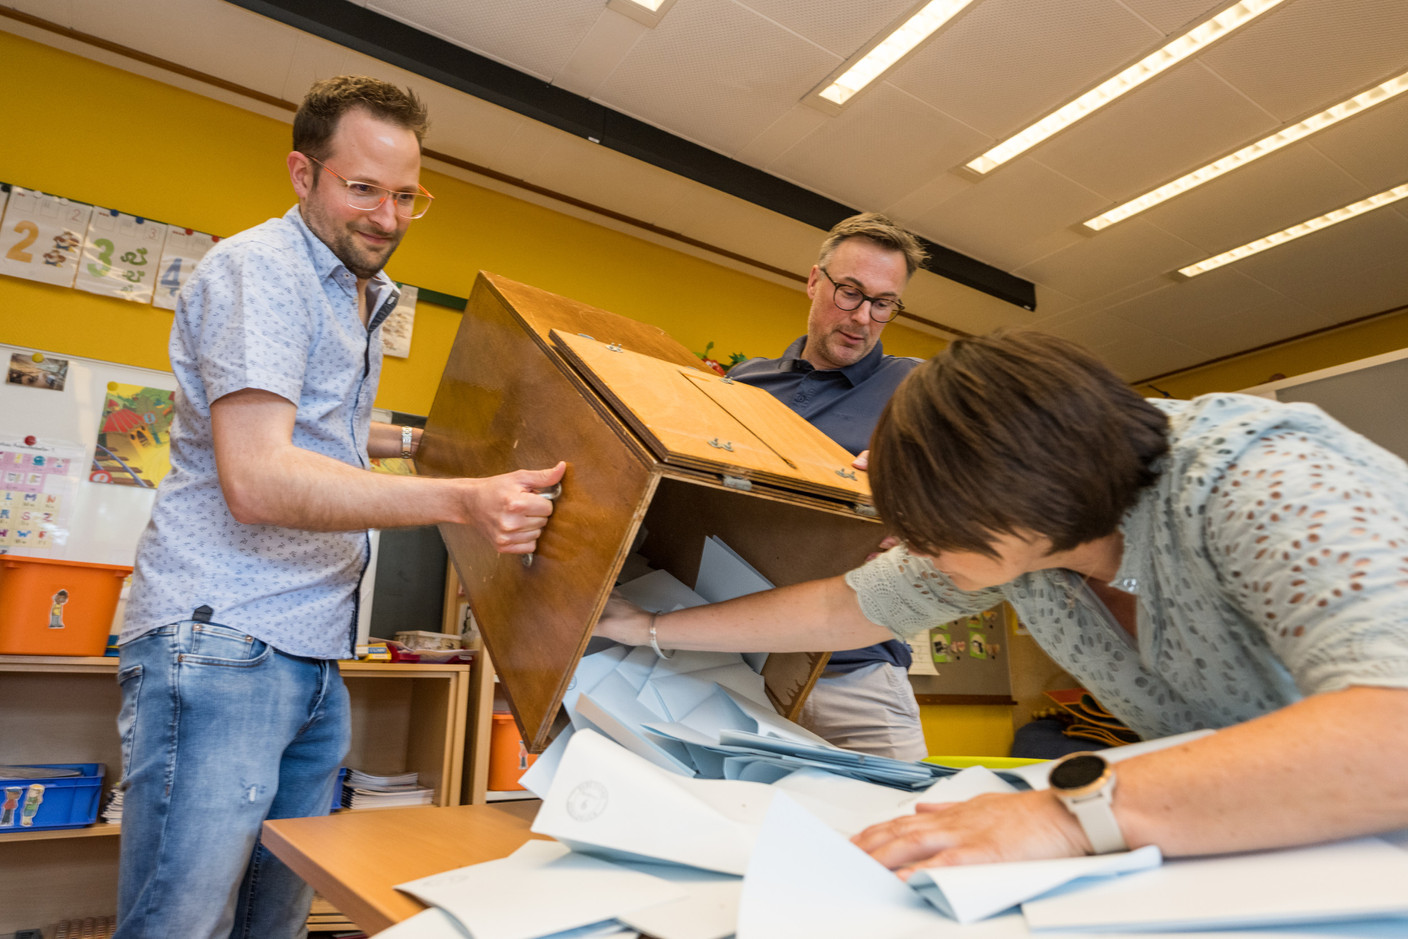 Election workers start counting ballots in Ettelbruck, 11 June 2023. Photo: Nader Ghavami